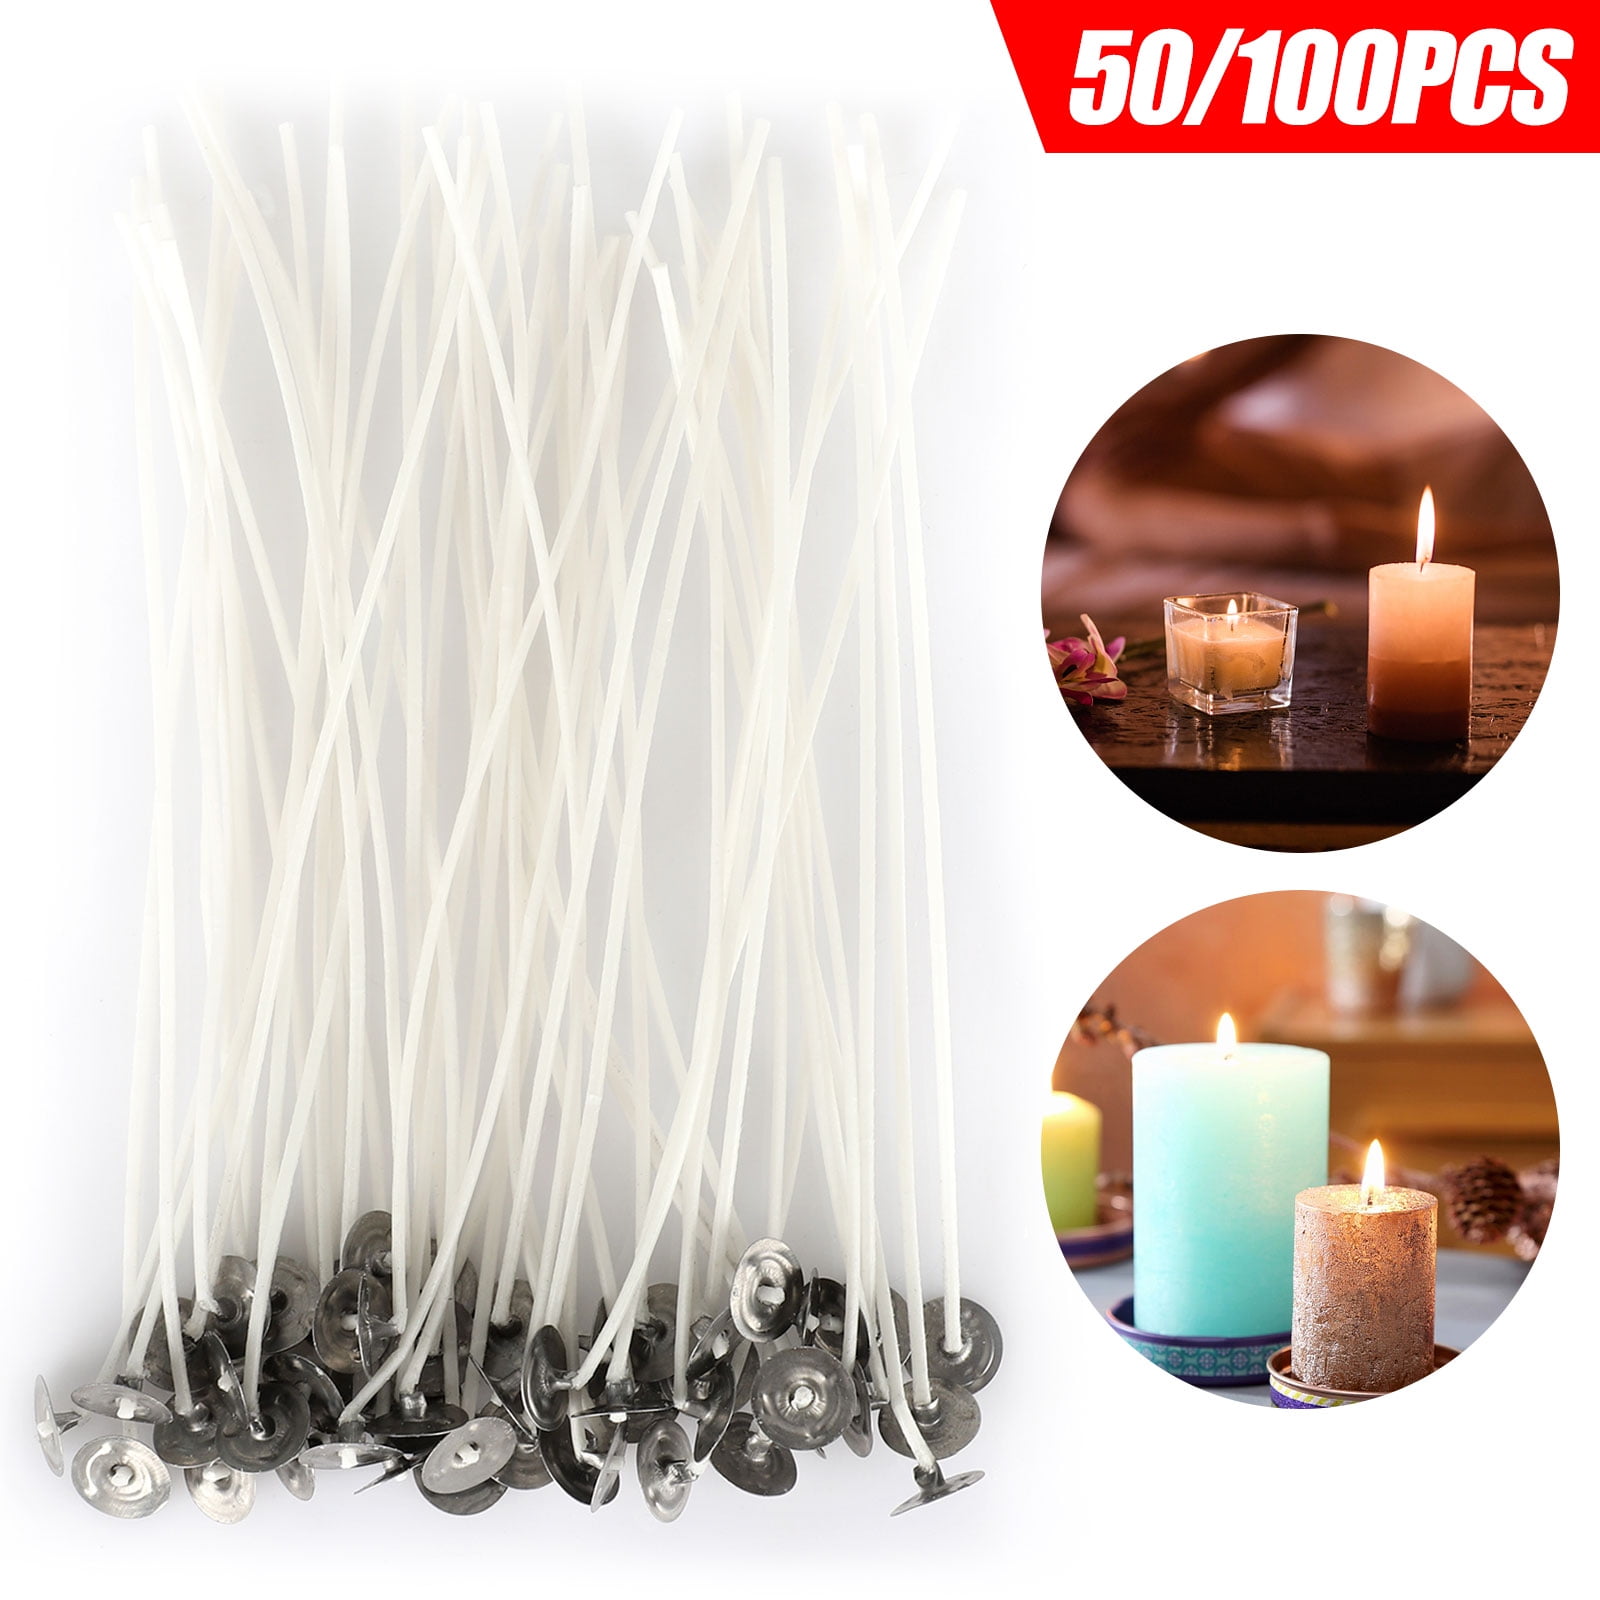 100Pcs 8 Inch Wooden Candle  Pre-Waxed Candle Wicks Cotton Core Making Supplies 